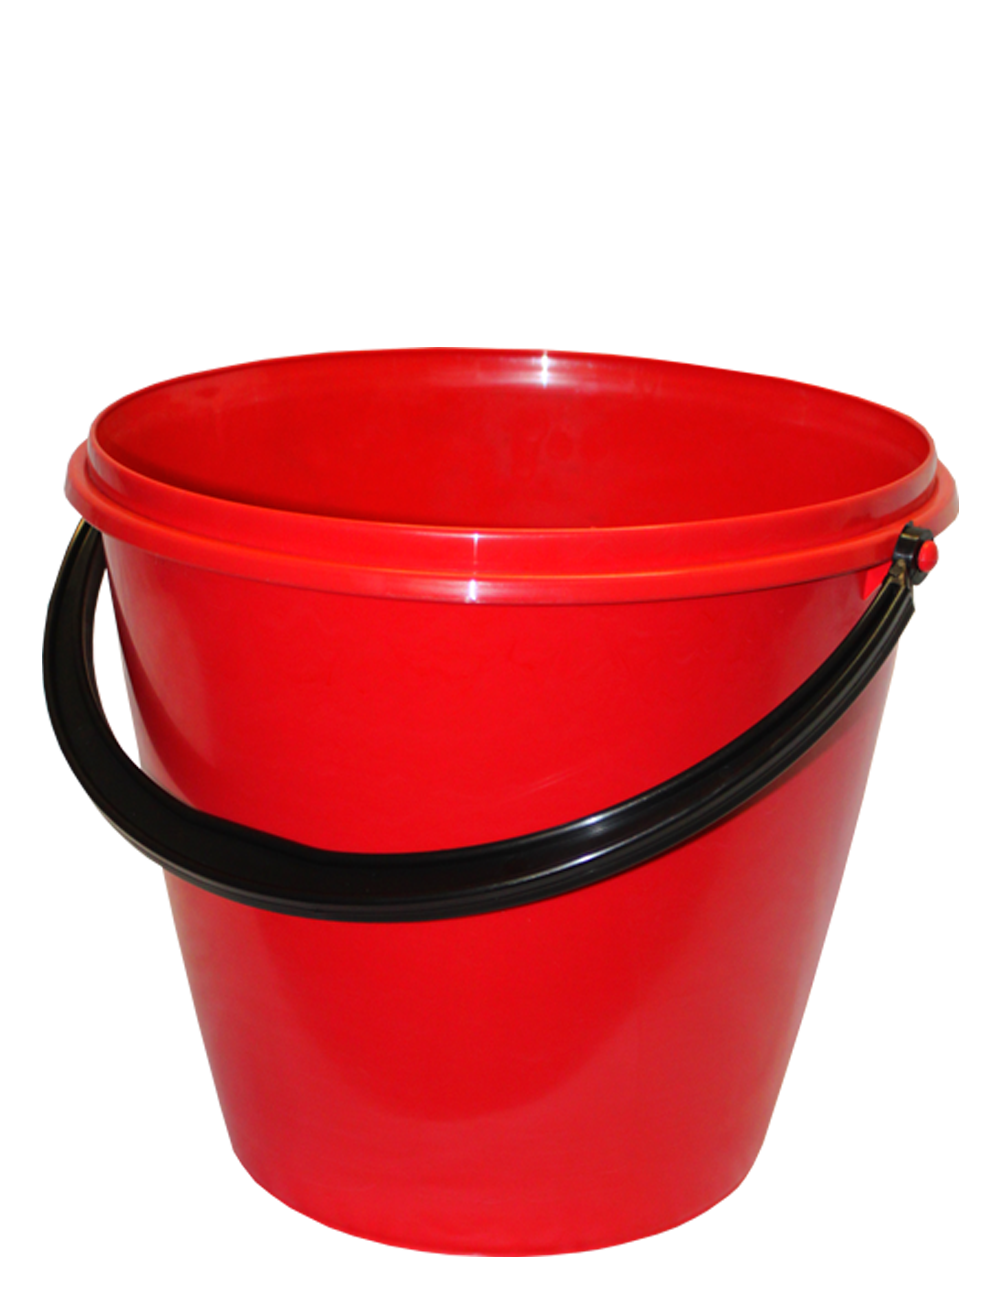 Plastic bucket png image. Red clipart pail